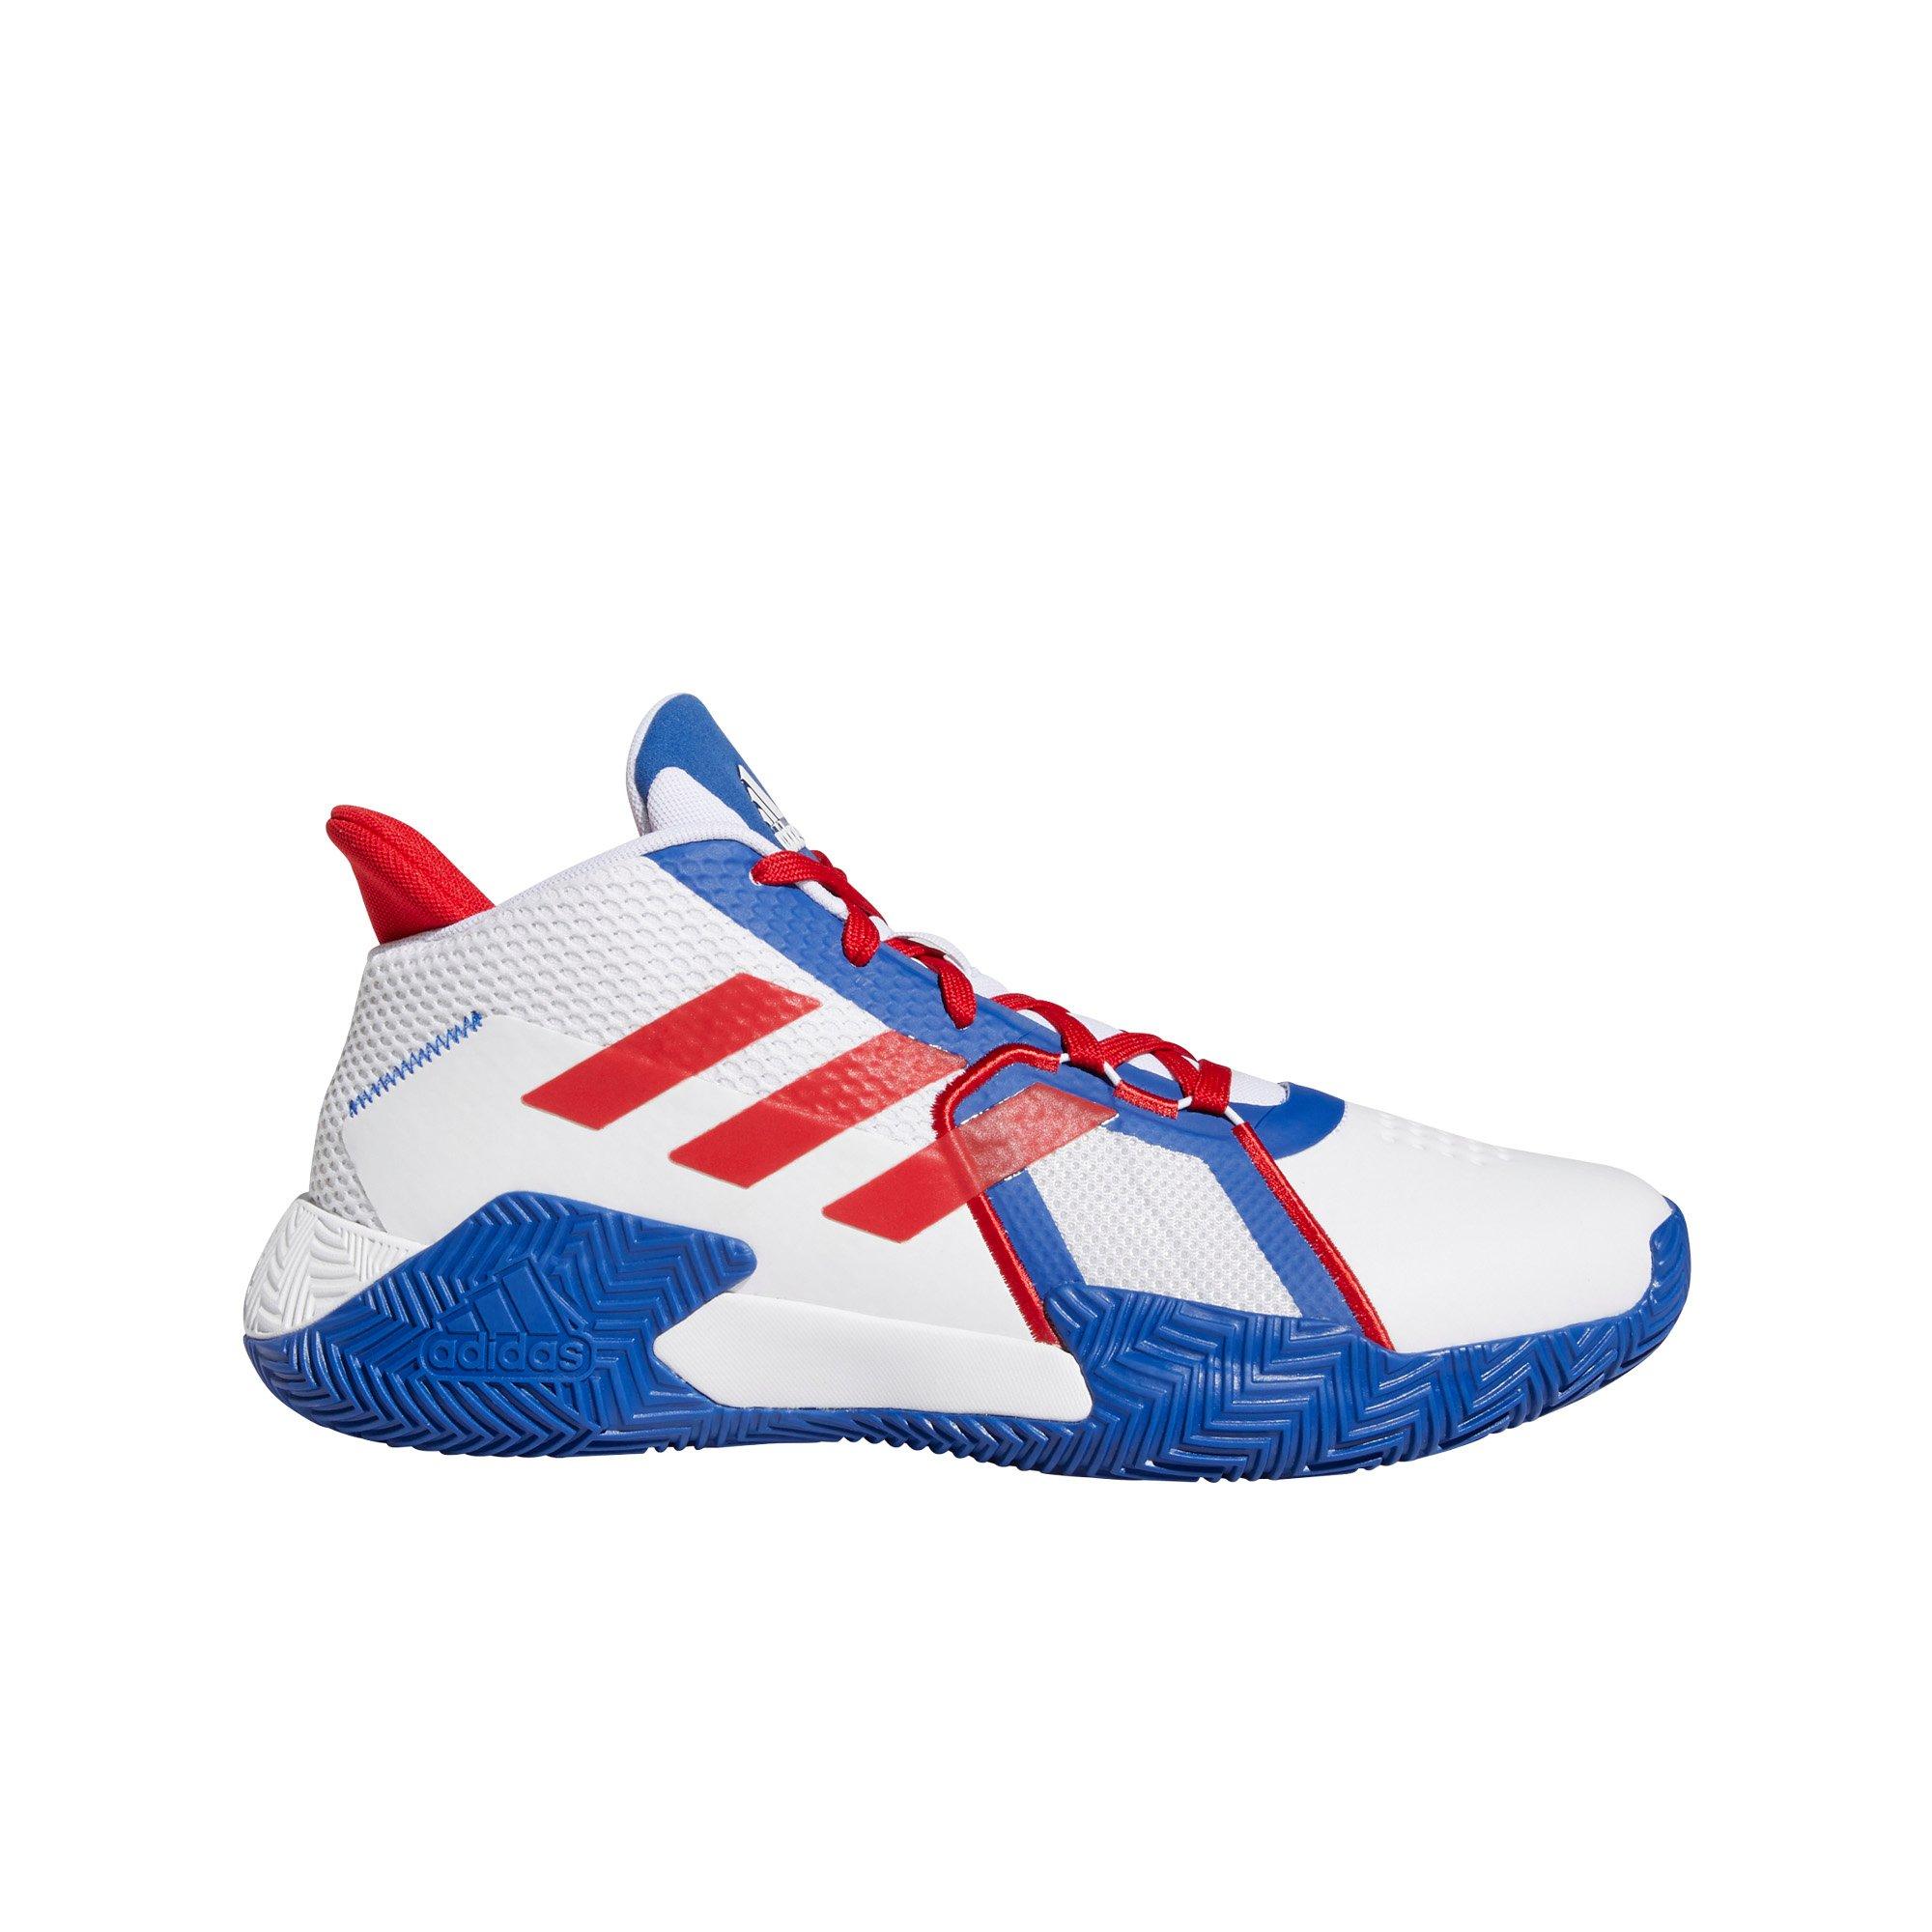 adidas shoes red blue white